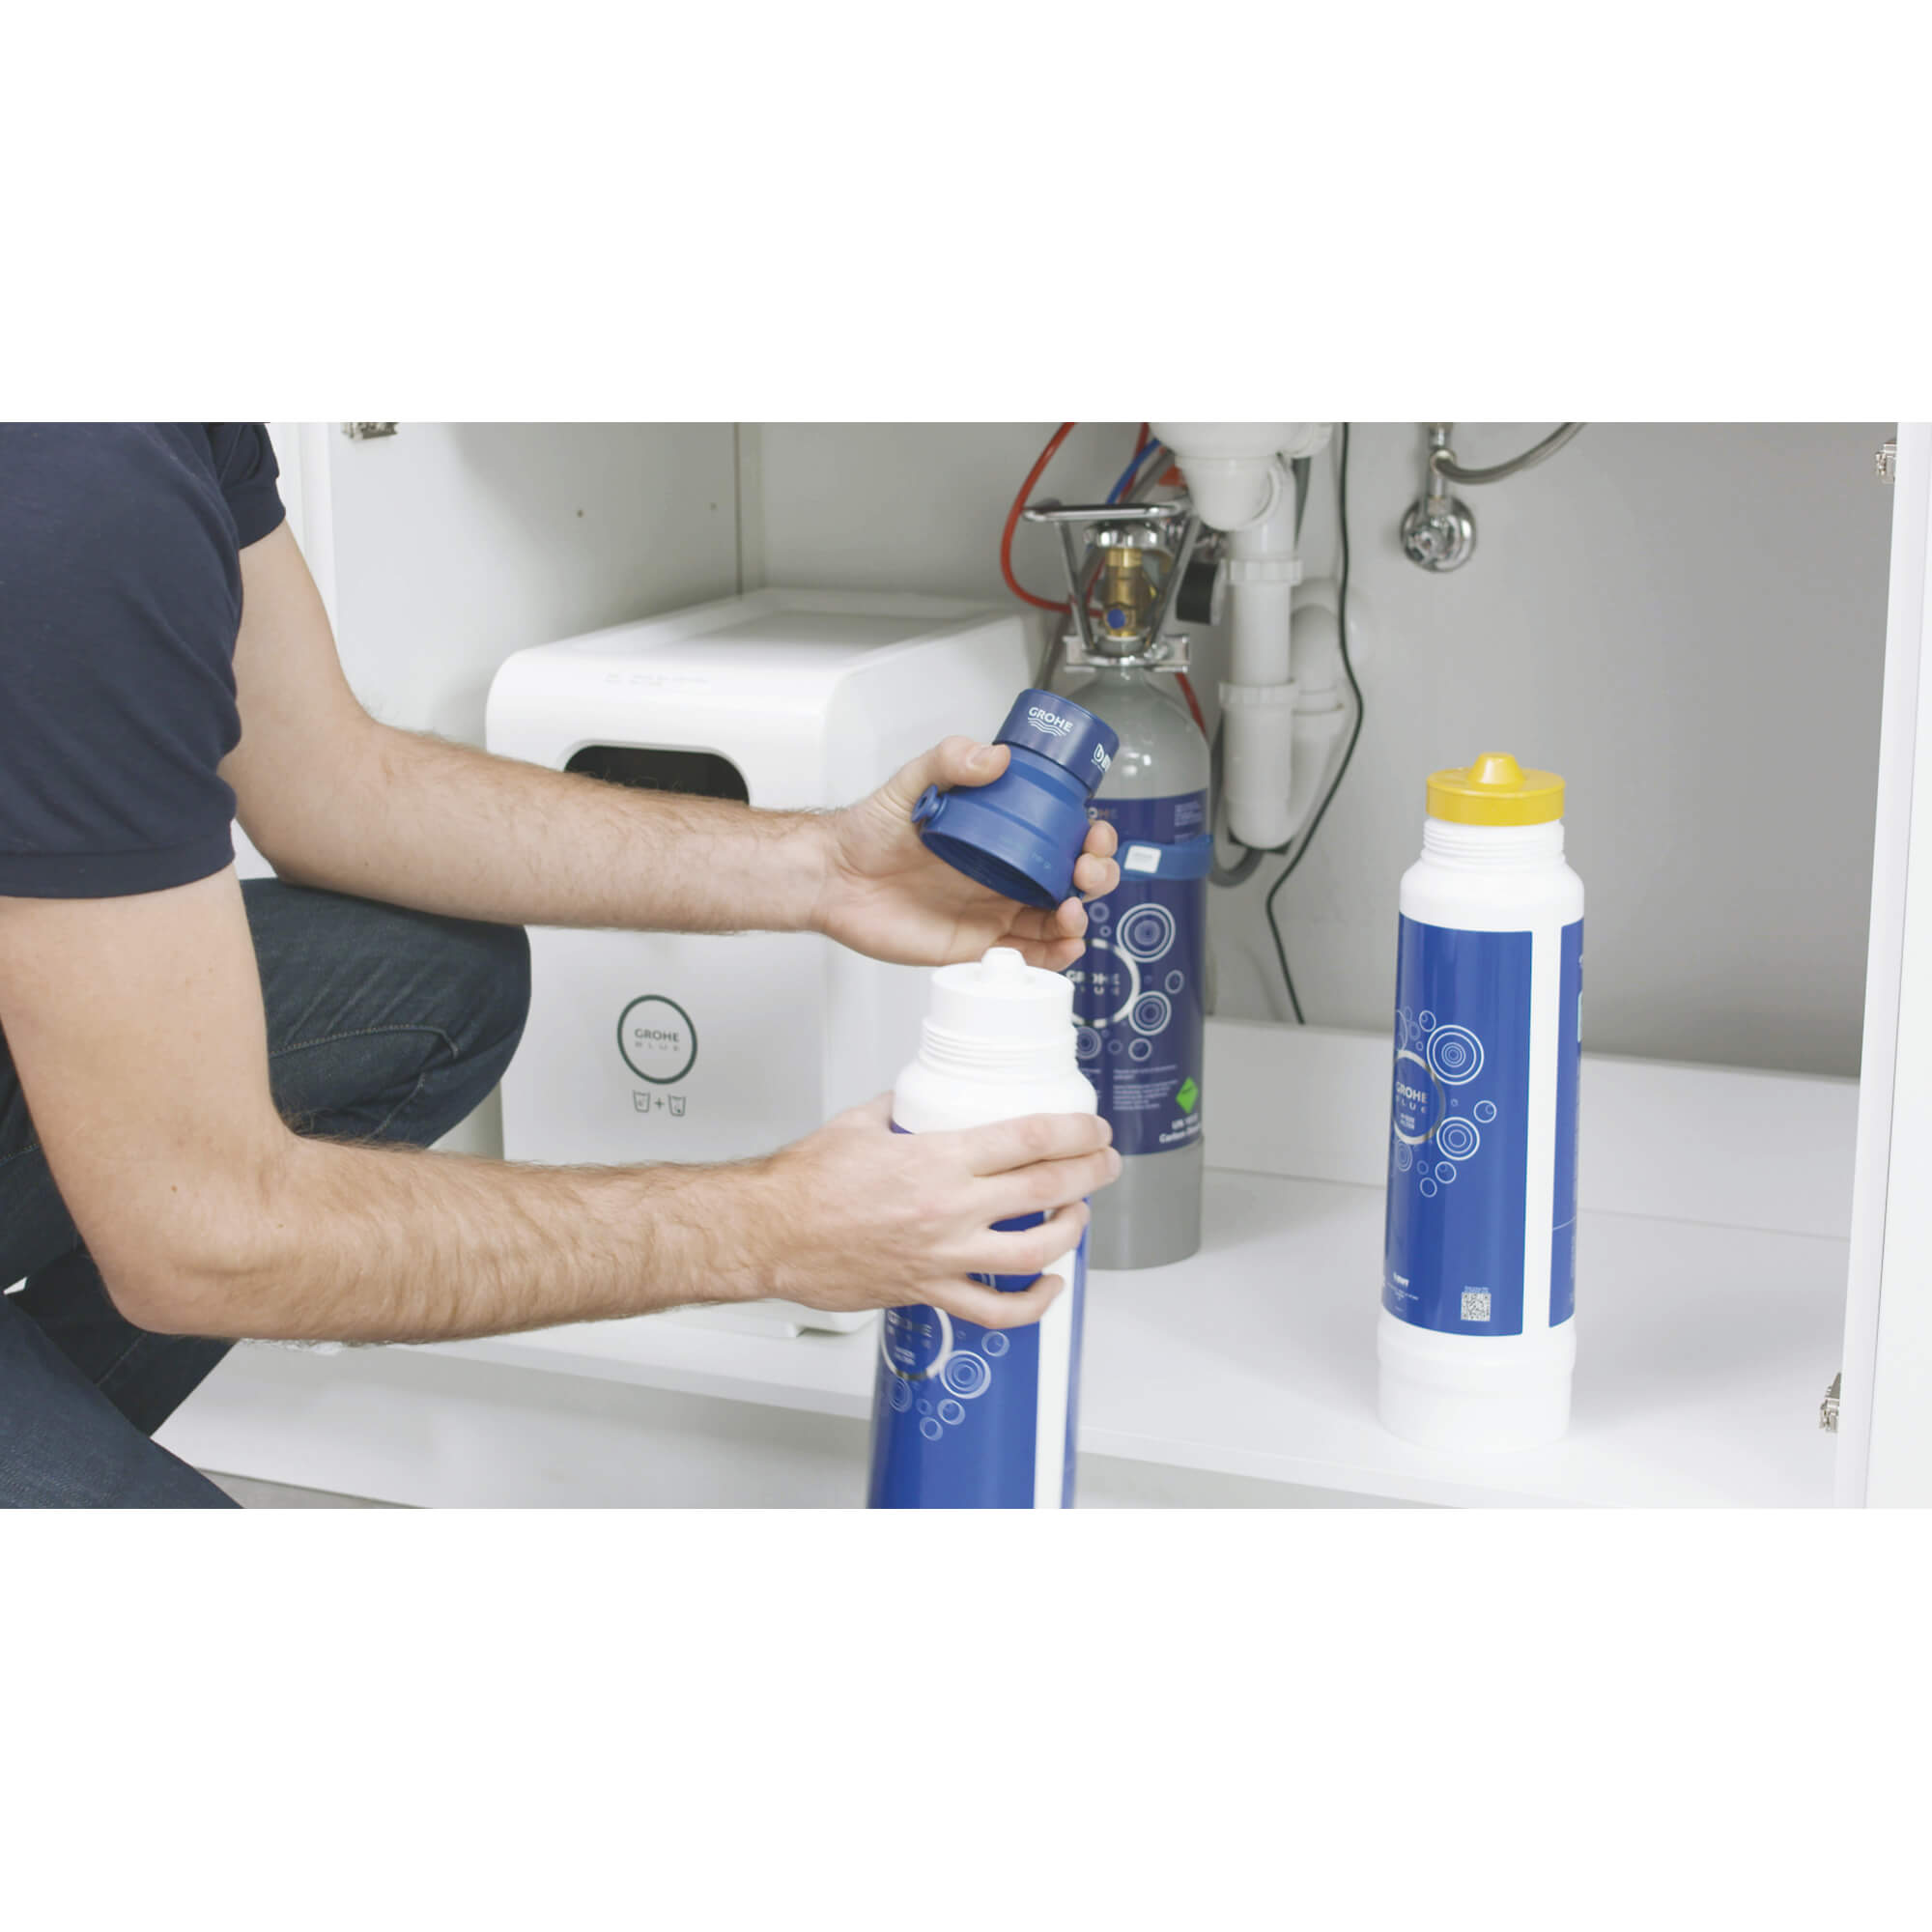 GROHE Blue Carbon Filter, S-Size